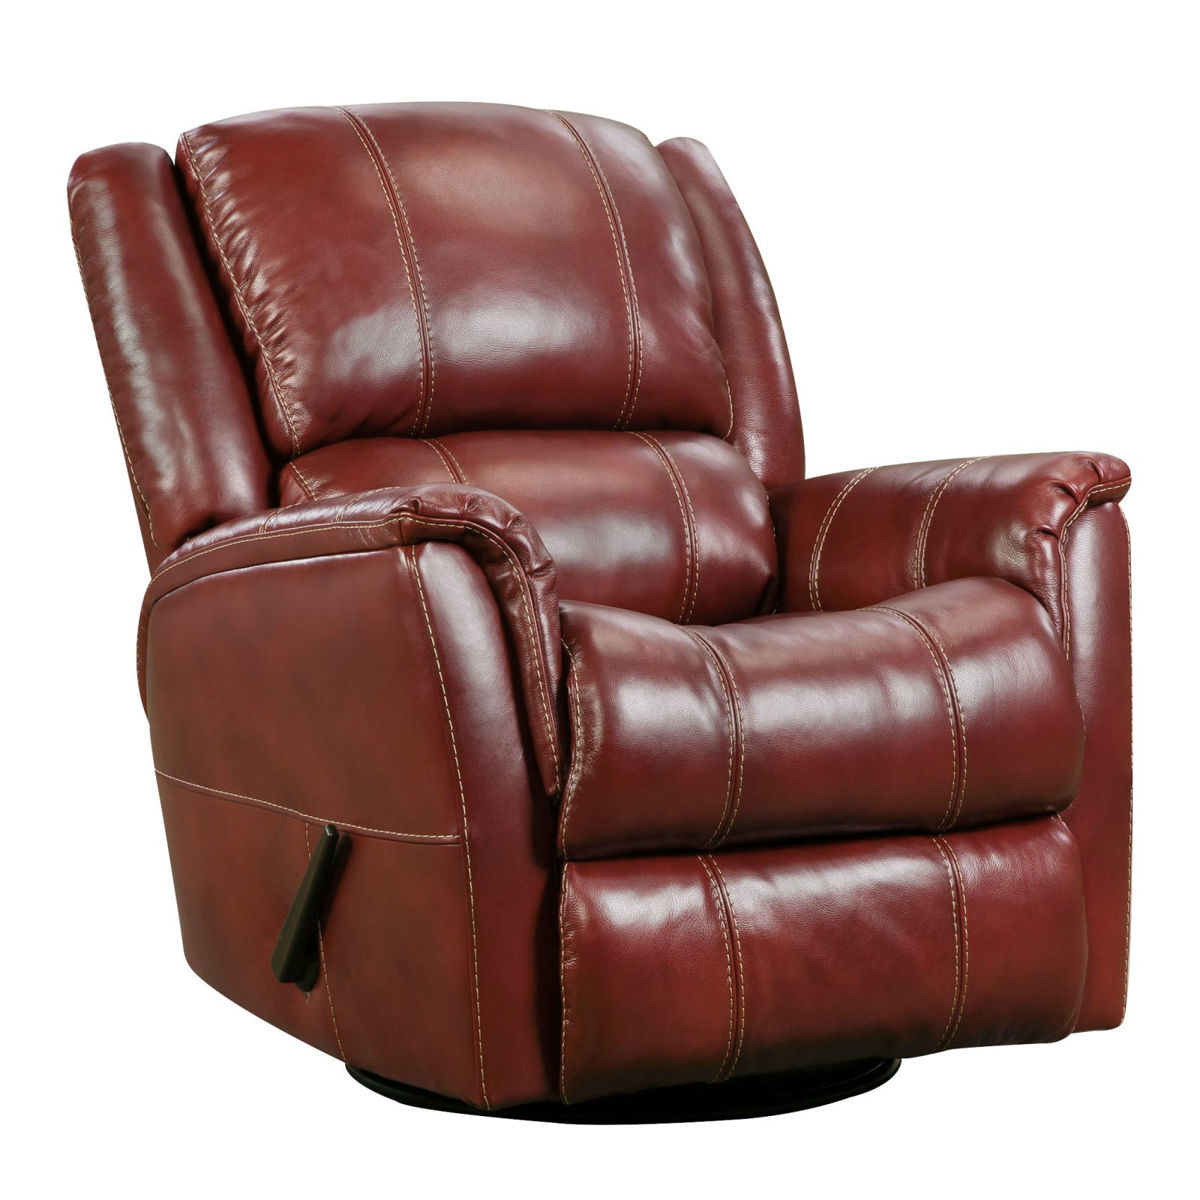 Picture of Mercury Red Leather Swivel Glider Recliner